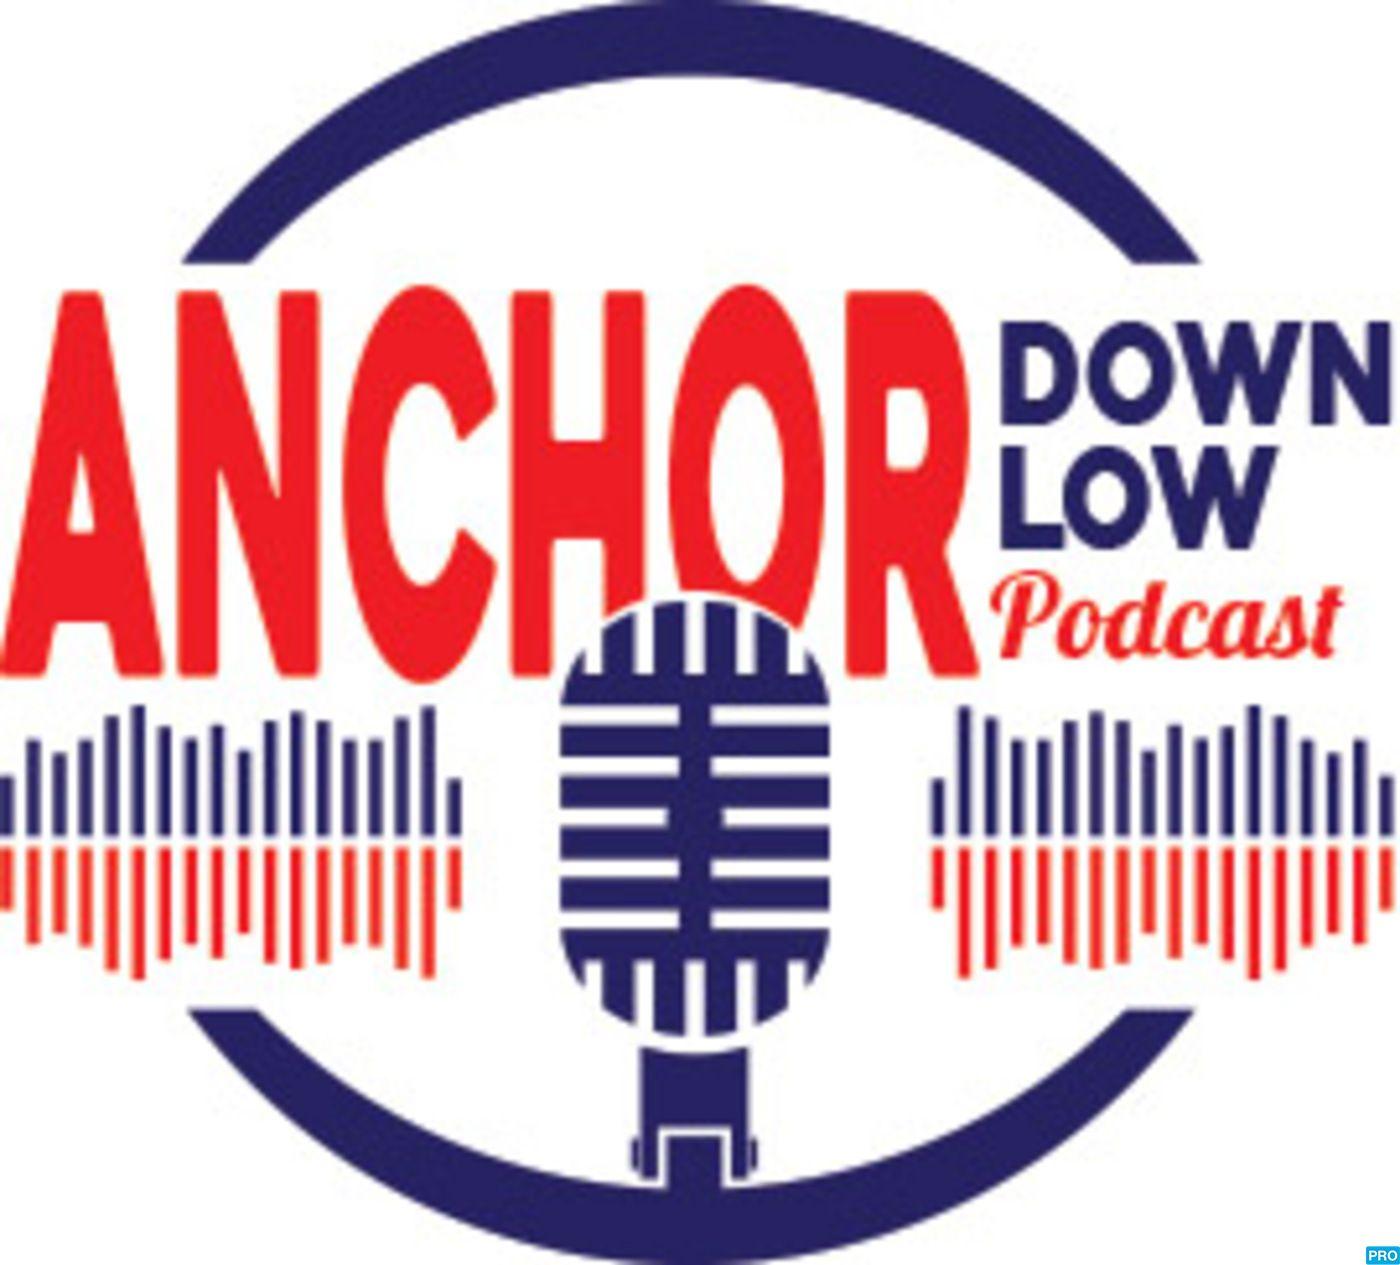 Anchor Down Logo - pod. fanatic. Podcast: The Anchor Down Low